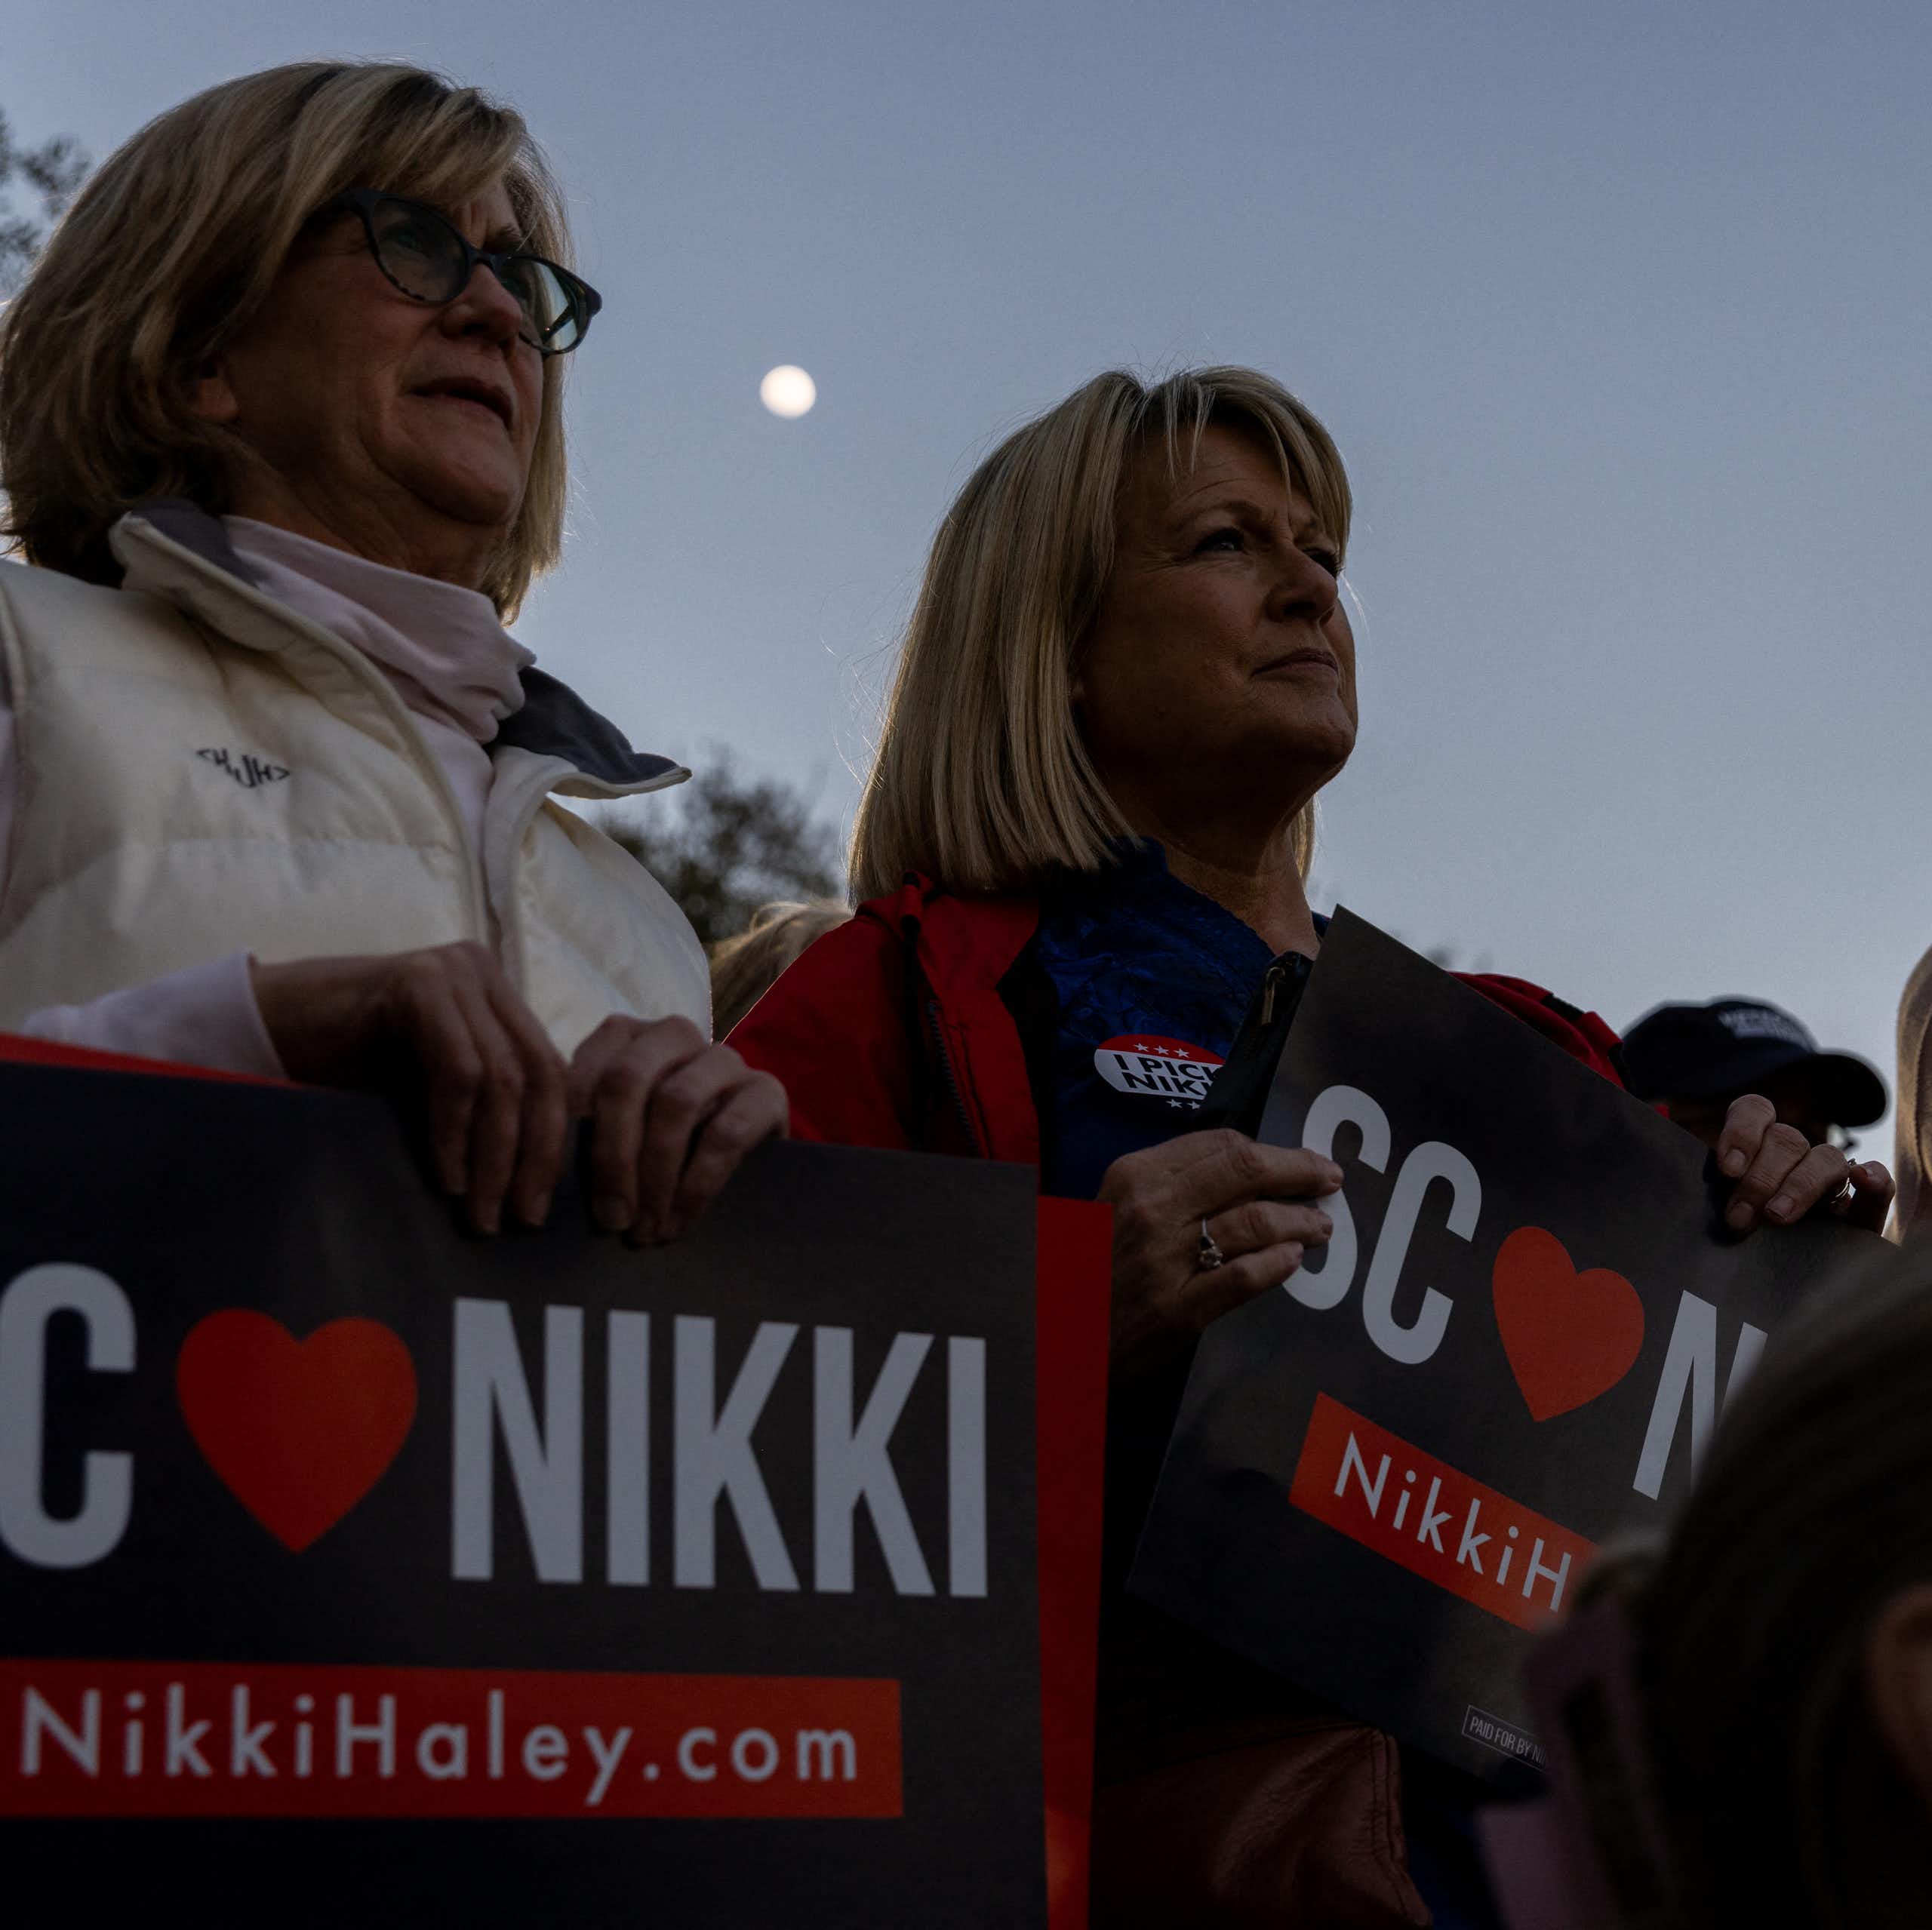 Three middle aged white women look in the same direction and hold up signs that say 'SC loves Nikki'